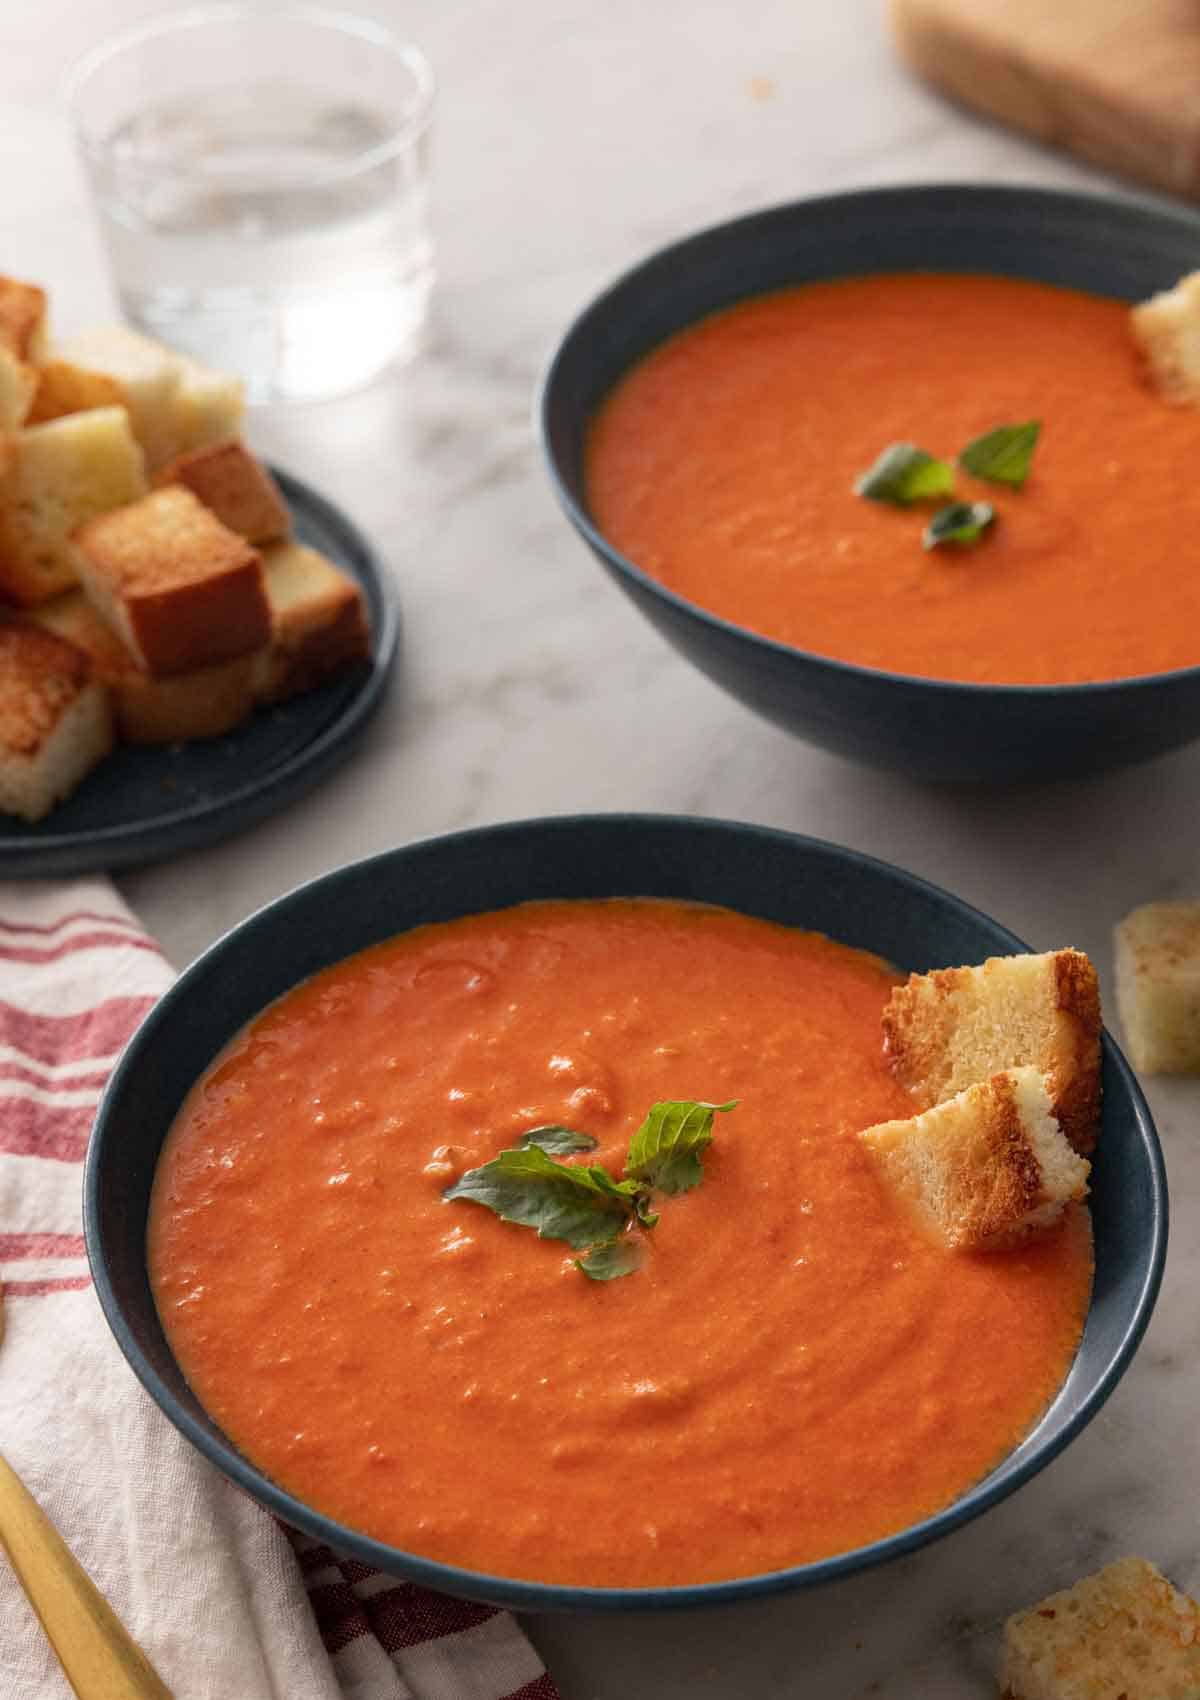 Two bowls of tomato soup topped with some bread and fresh basil.